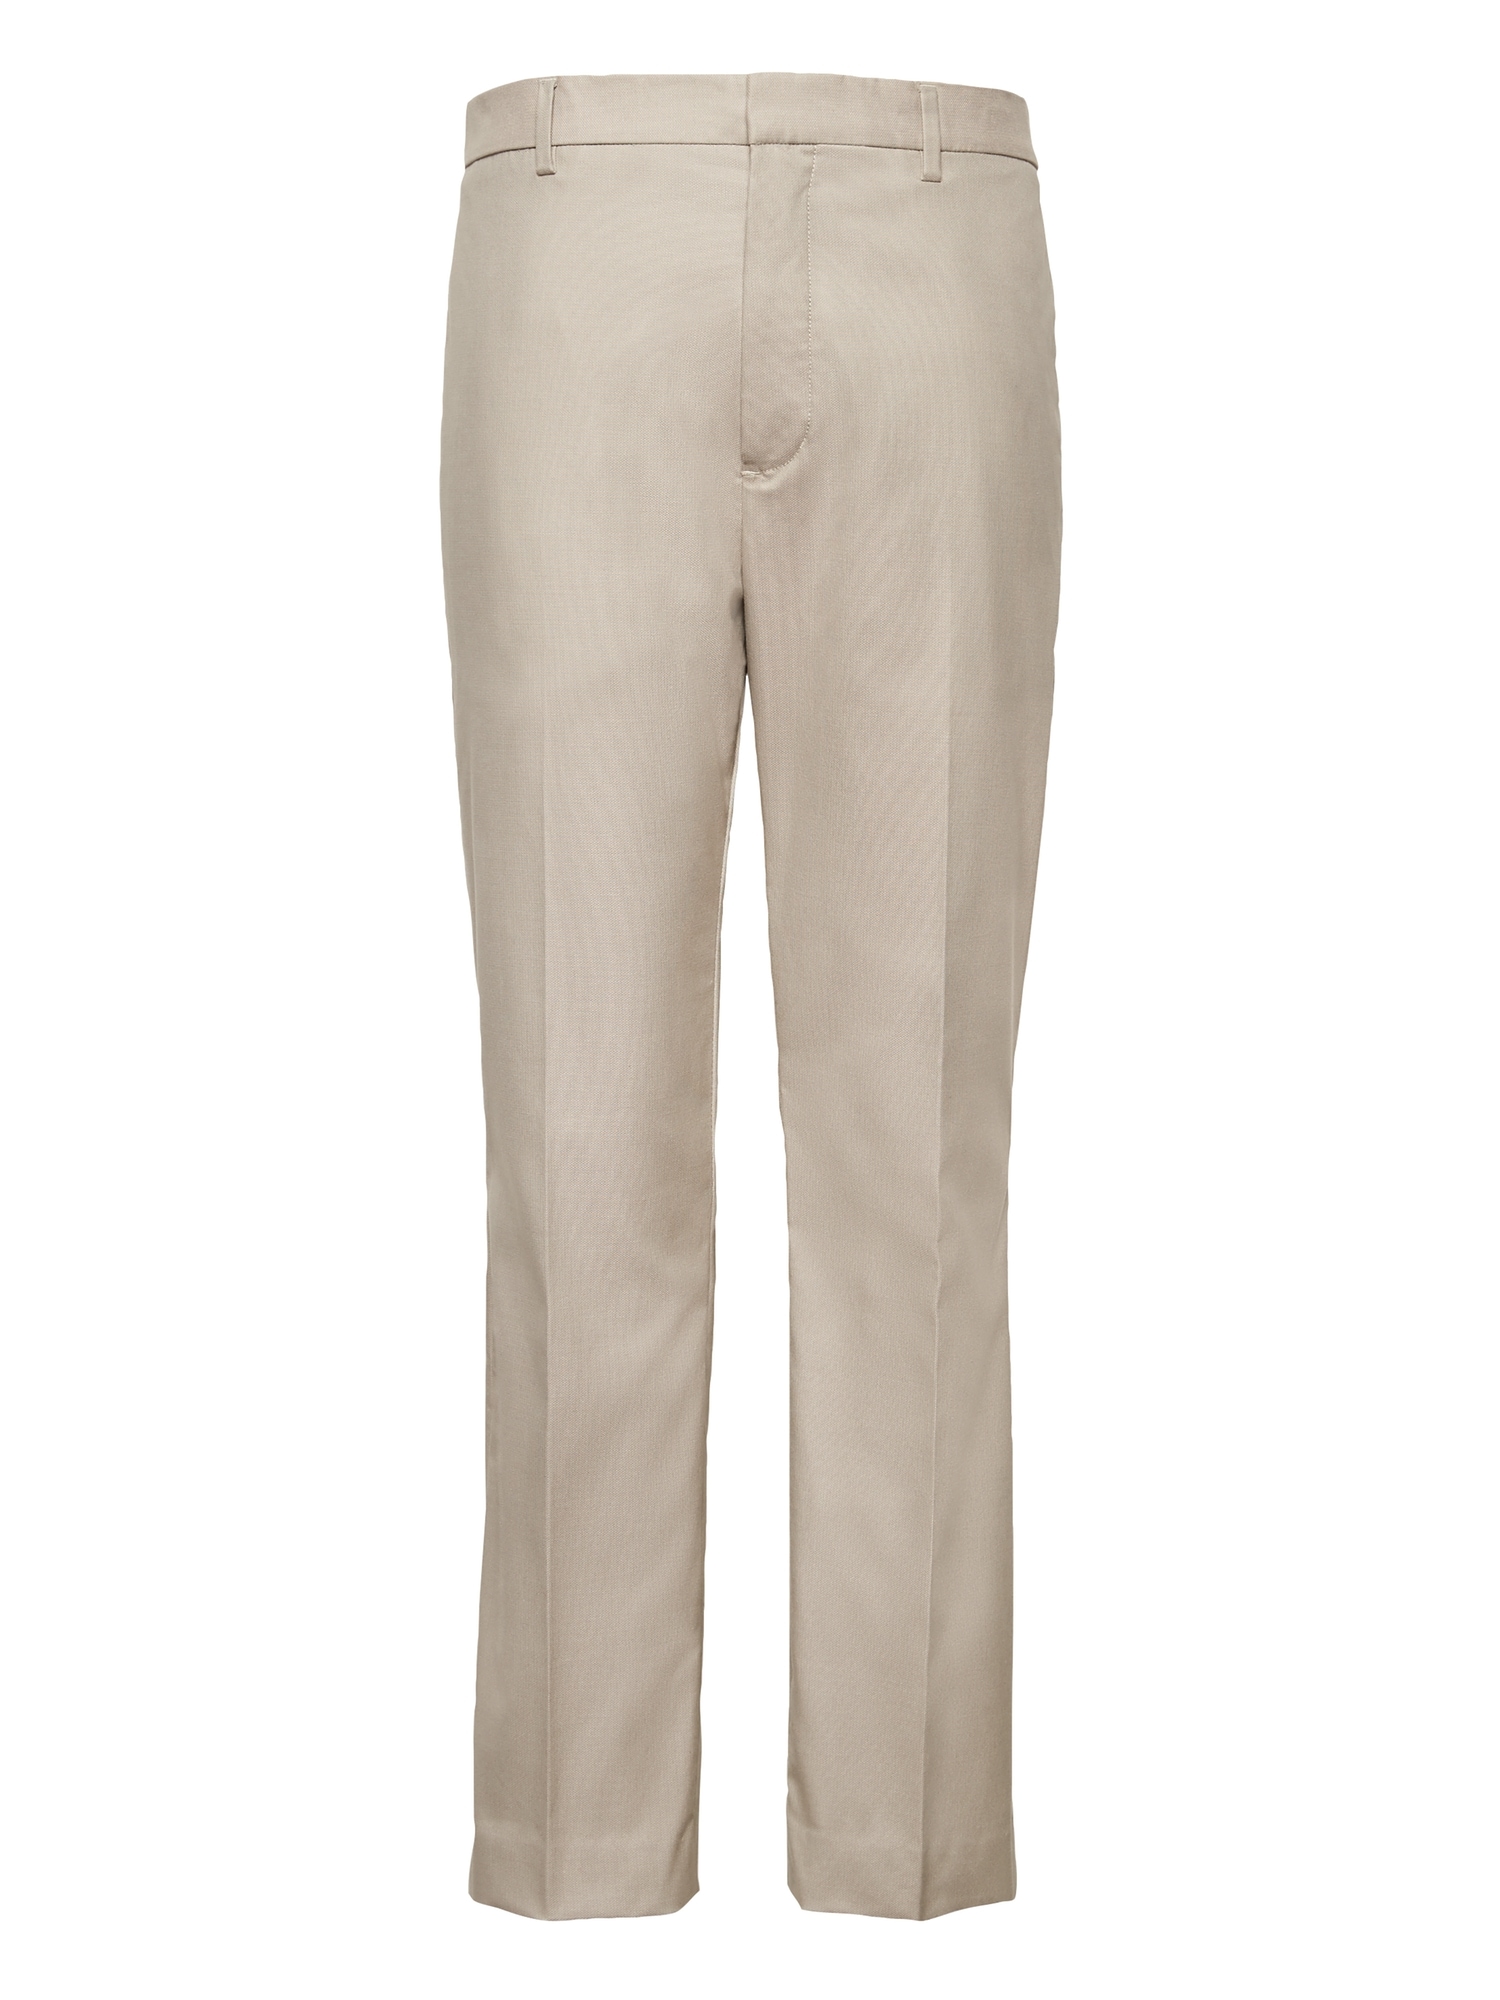 Athletic Tapered Non-Iron Stretch Dress Pant